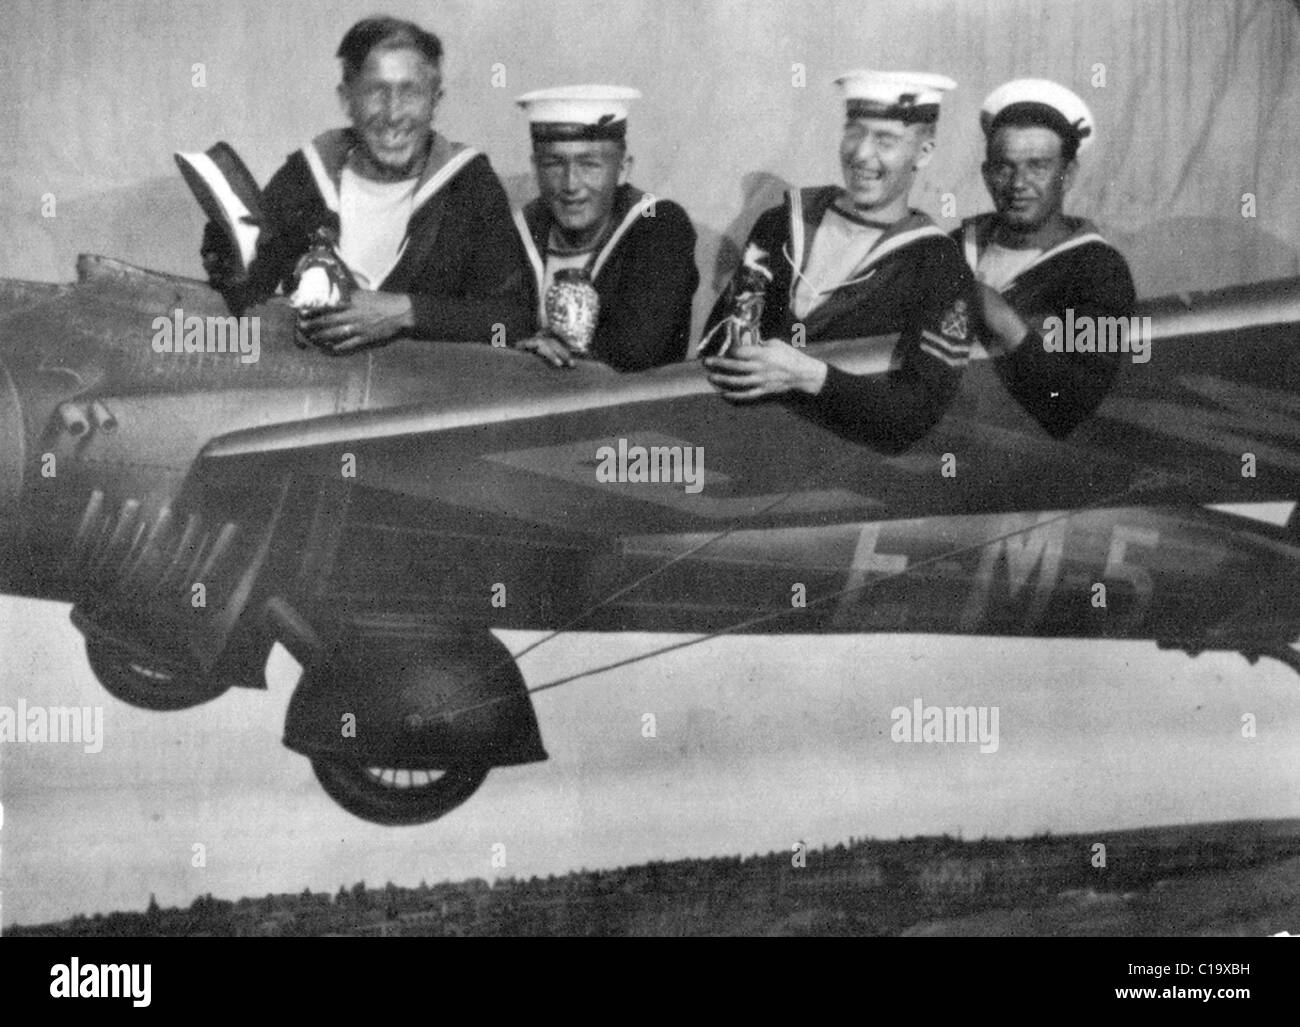 Four British Royal Navy sailors on shore leave pose in model aeroplane thought to be from HMS Adventure around 1936-37 Stock Photo